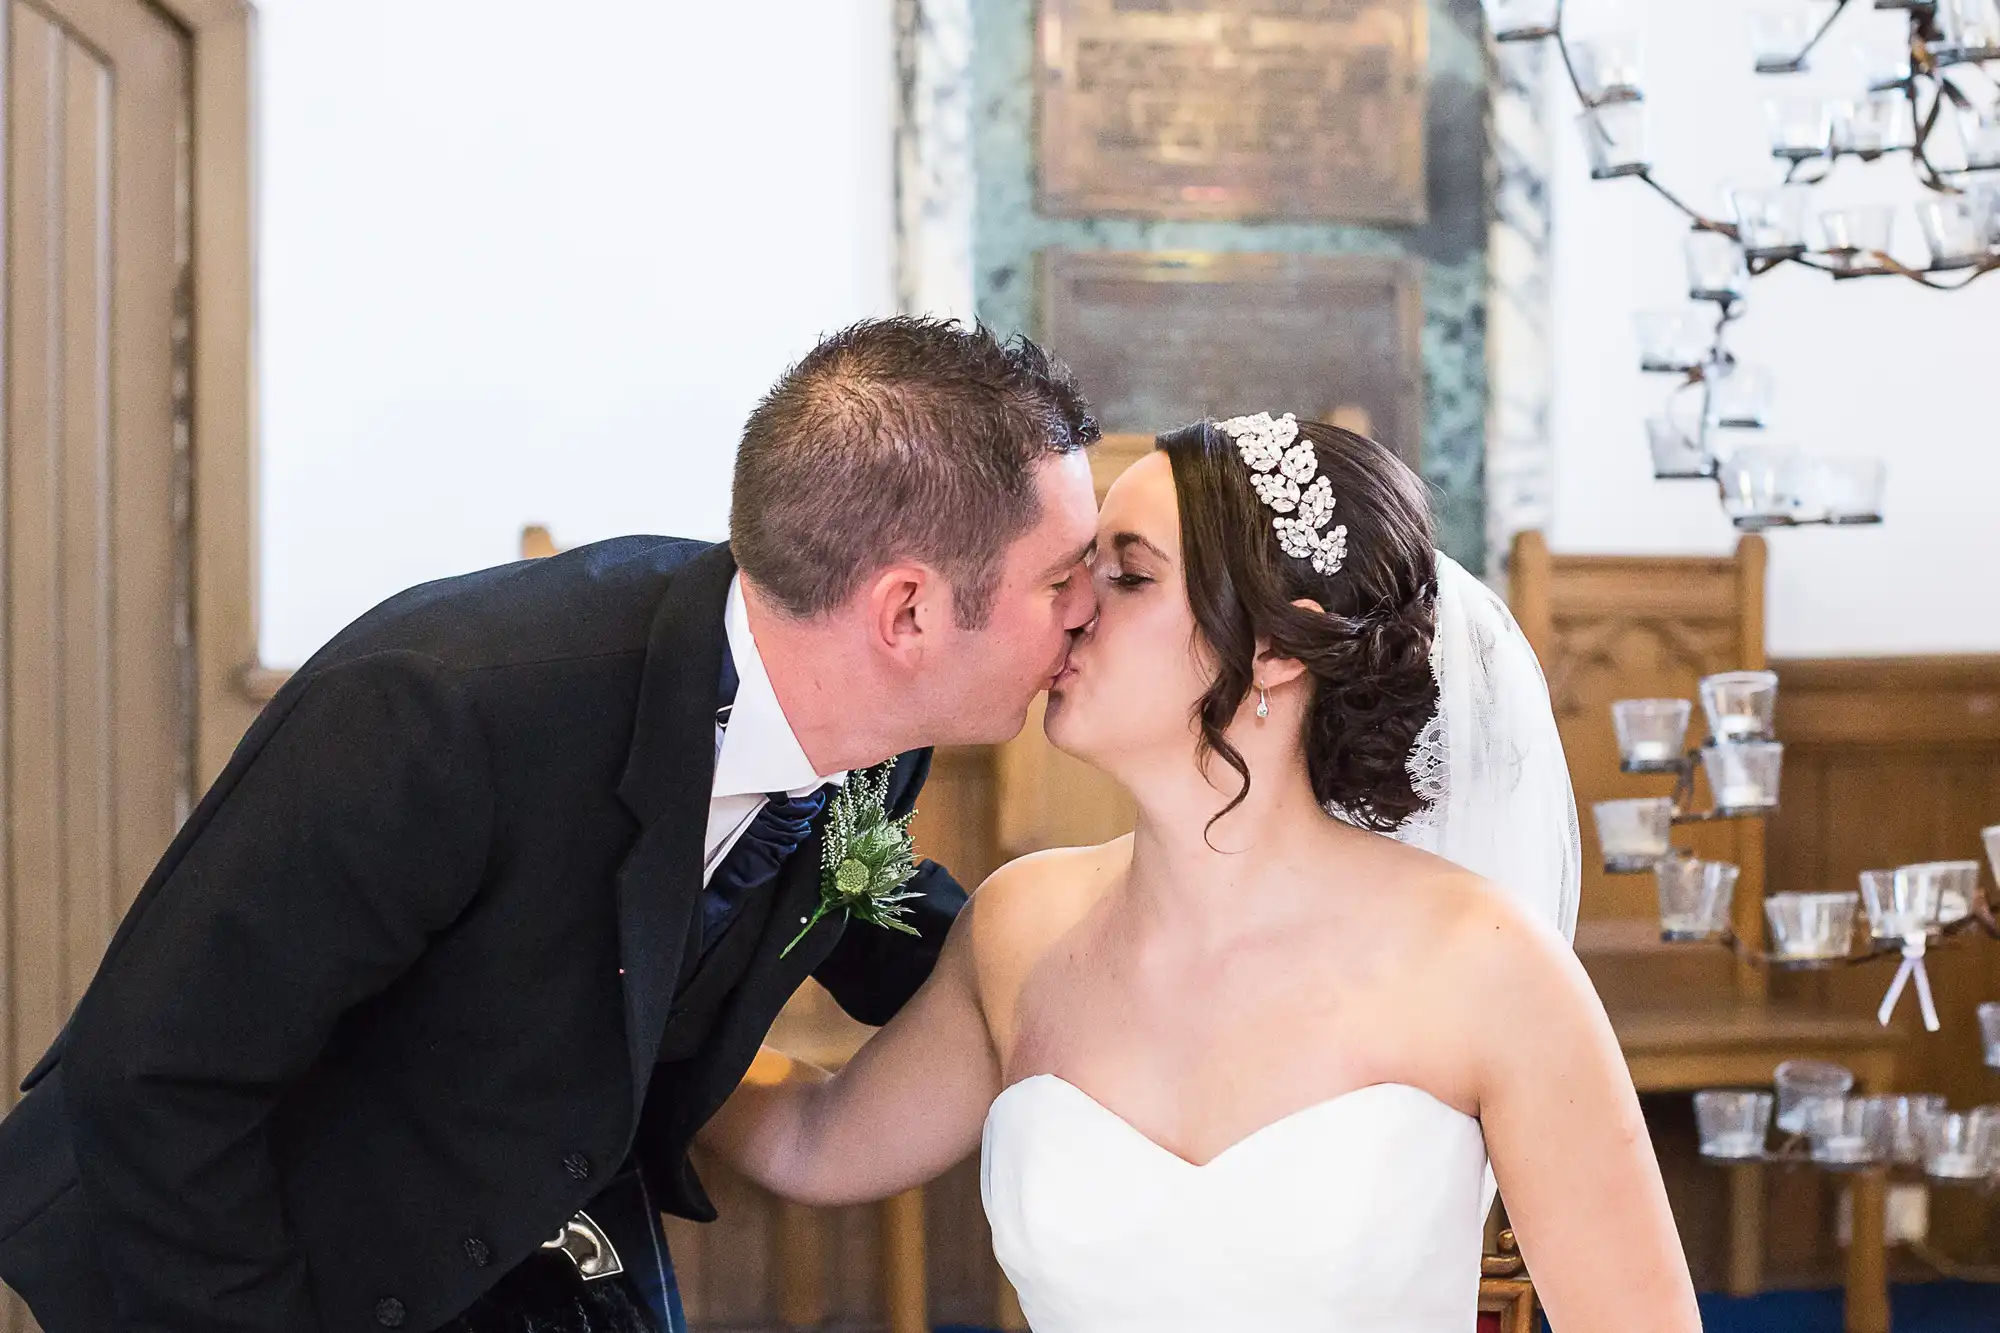 A bride and groom kissing inside a church at their wedding ceremony, with decorative lights in the background.